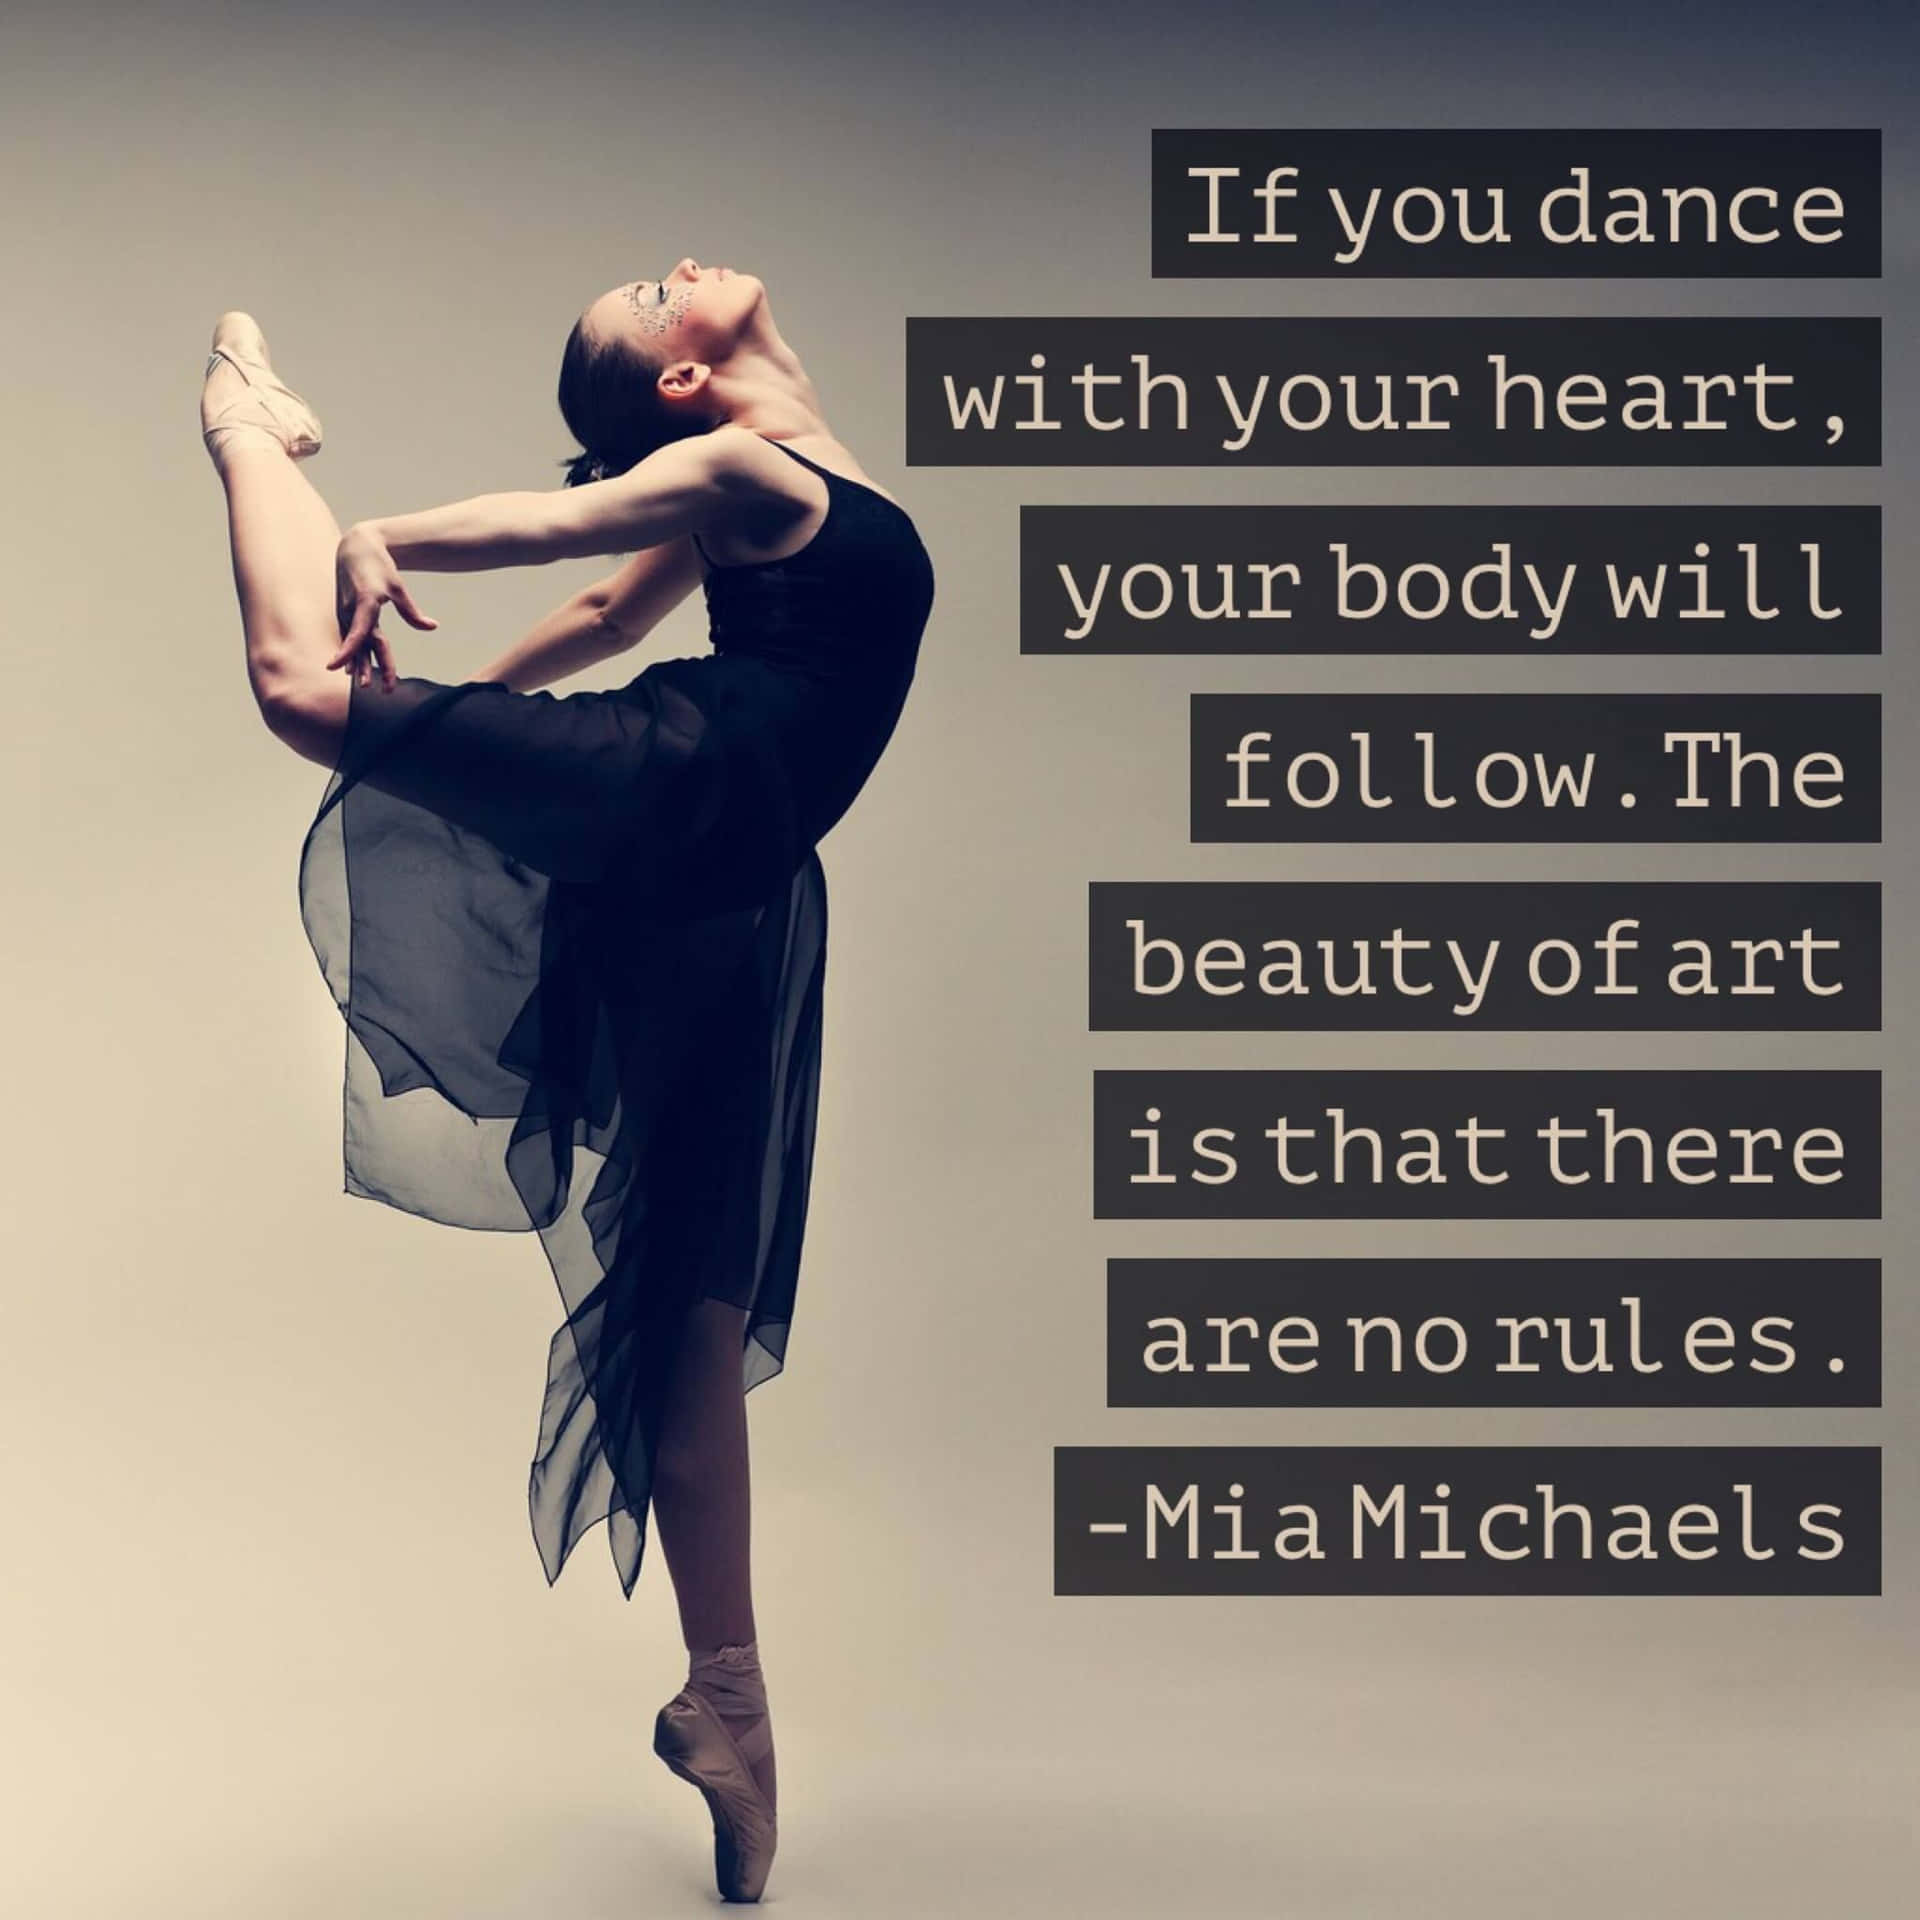 A Woman Dancing With Her Heart And Saying If You Dance With Your Heart, You Will Follow Your Heart